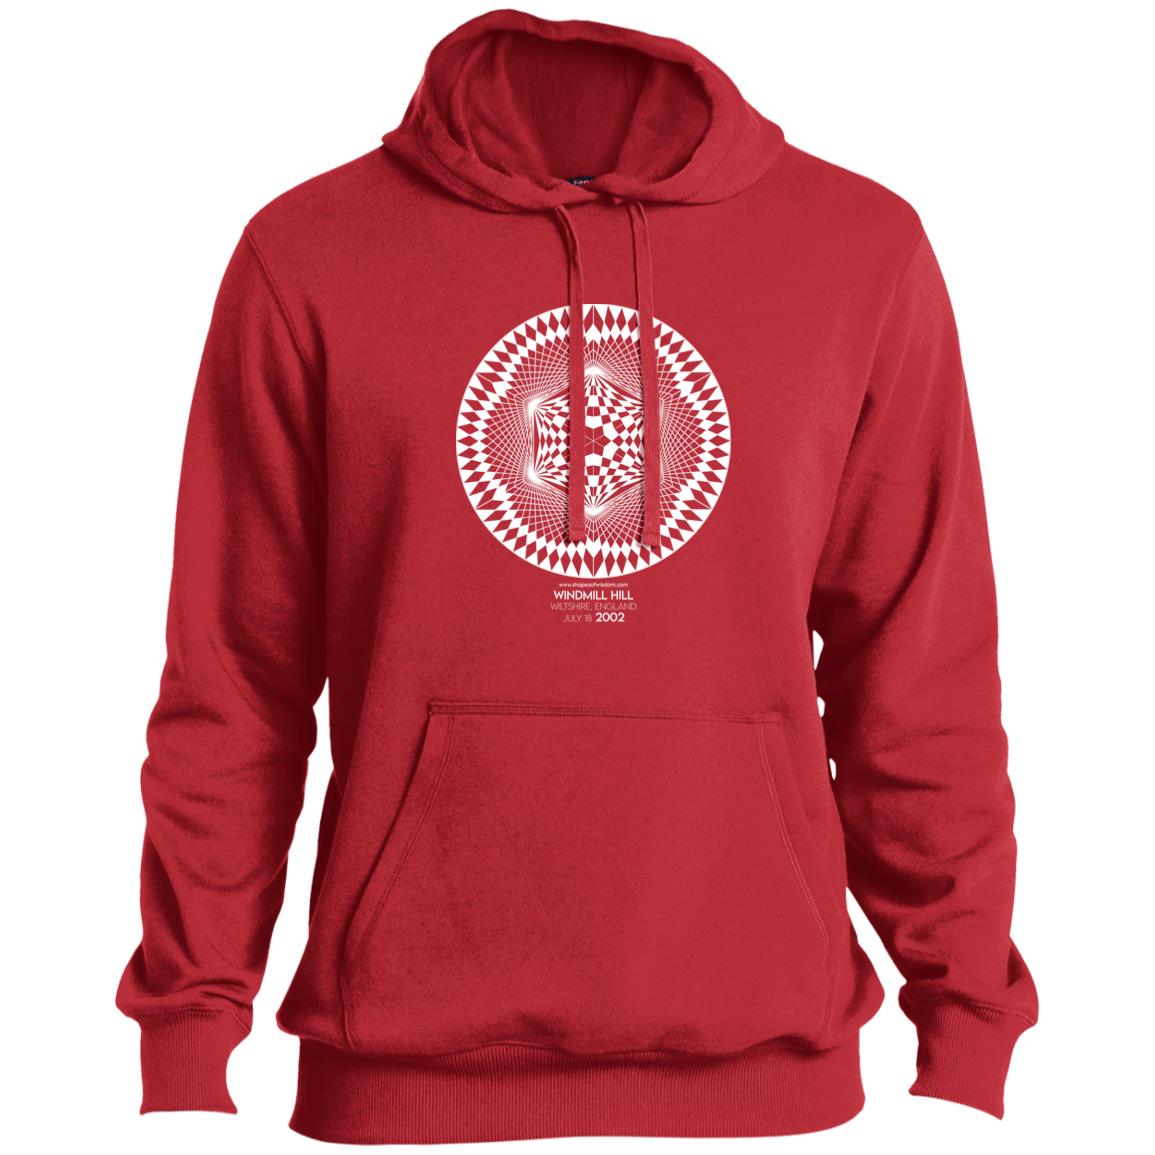 Crop Circle Pullover Hoodie - Windmill Hill 4